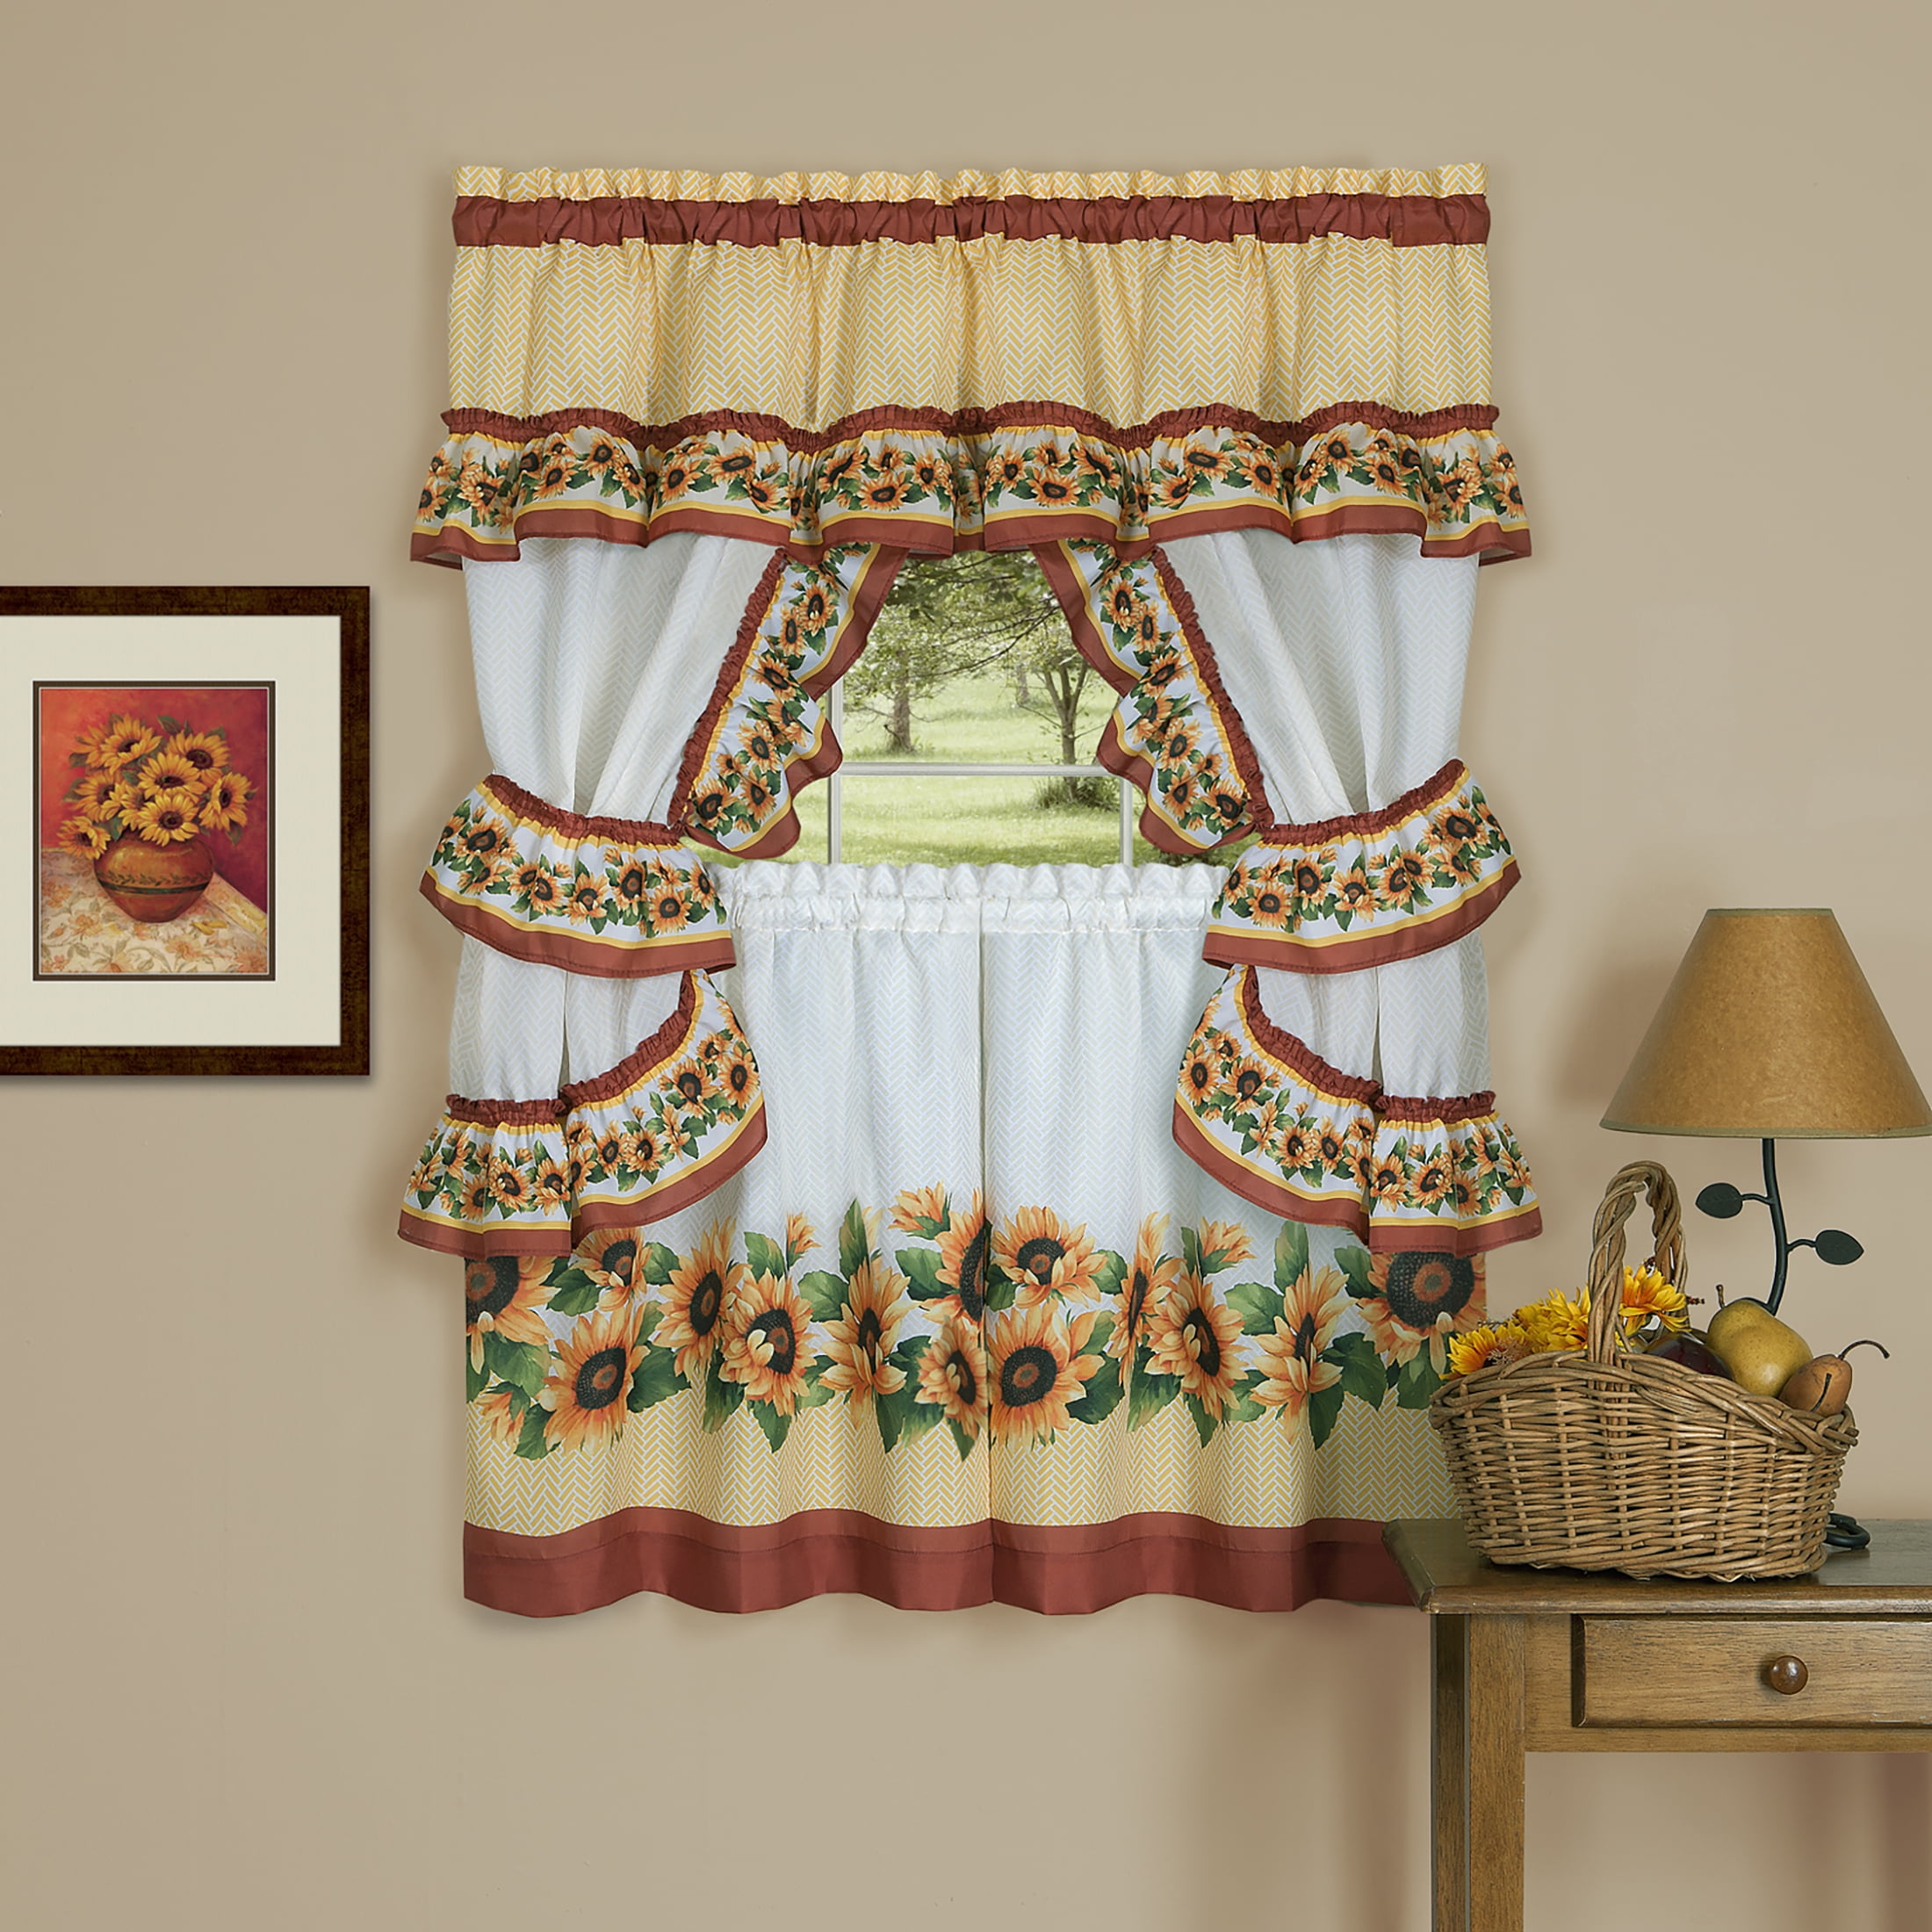 5-Piece Window Kitchen Curtain Set Tier Panels and Valance with Sunflower Print 